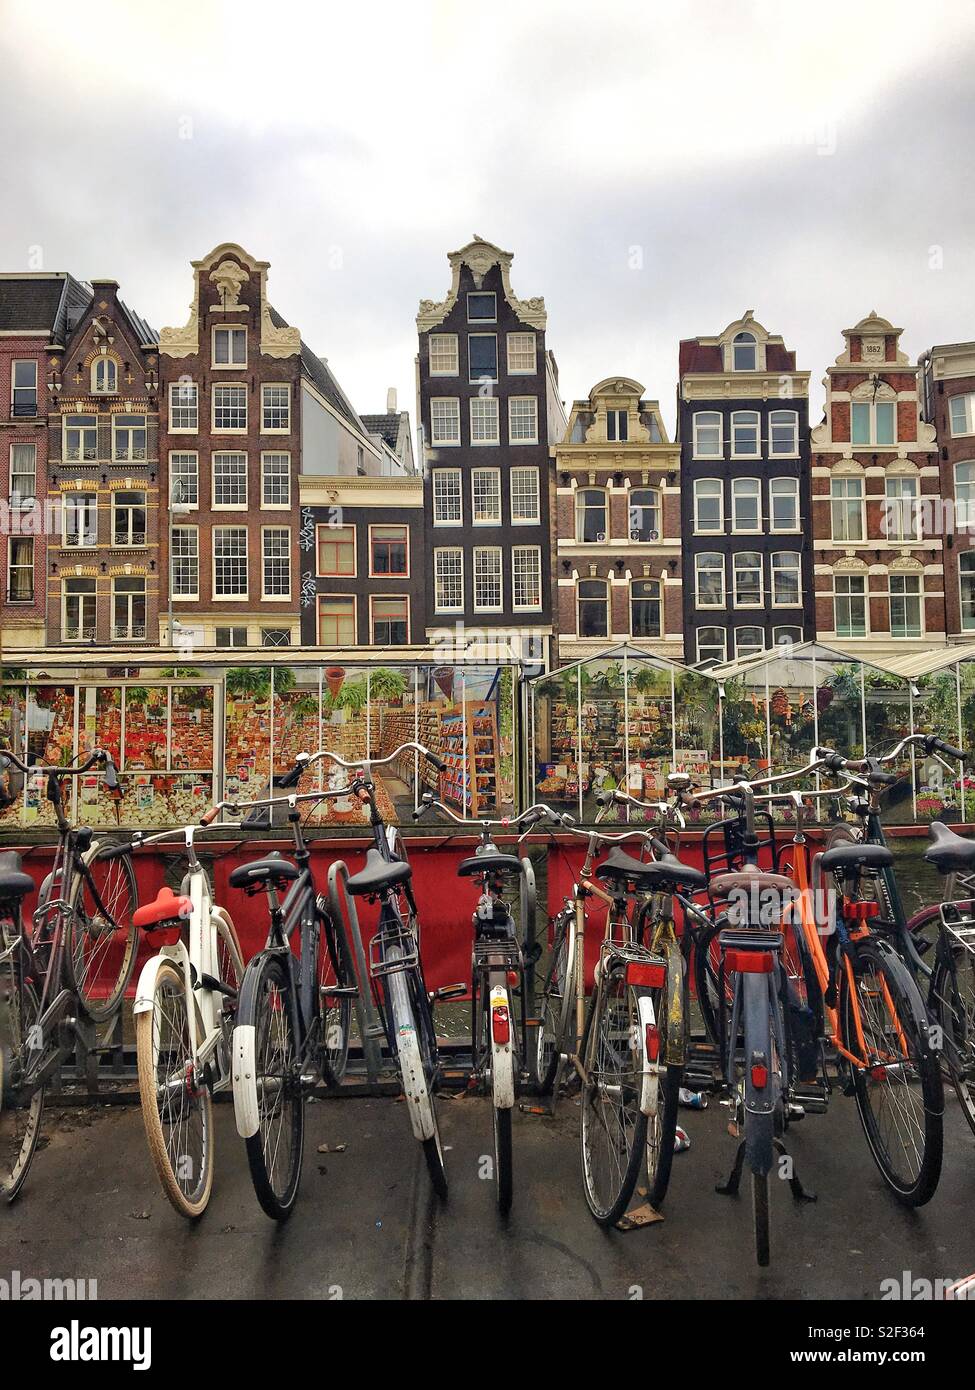 The Dutchest photo - bikes, canal, houses and cloudy weather Stock Photo